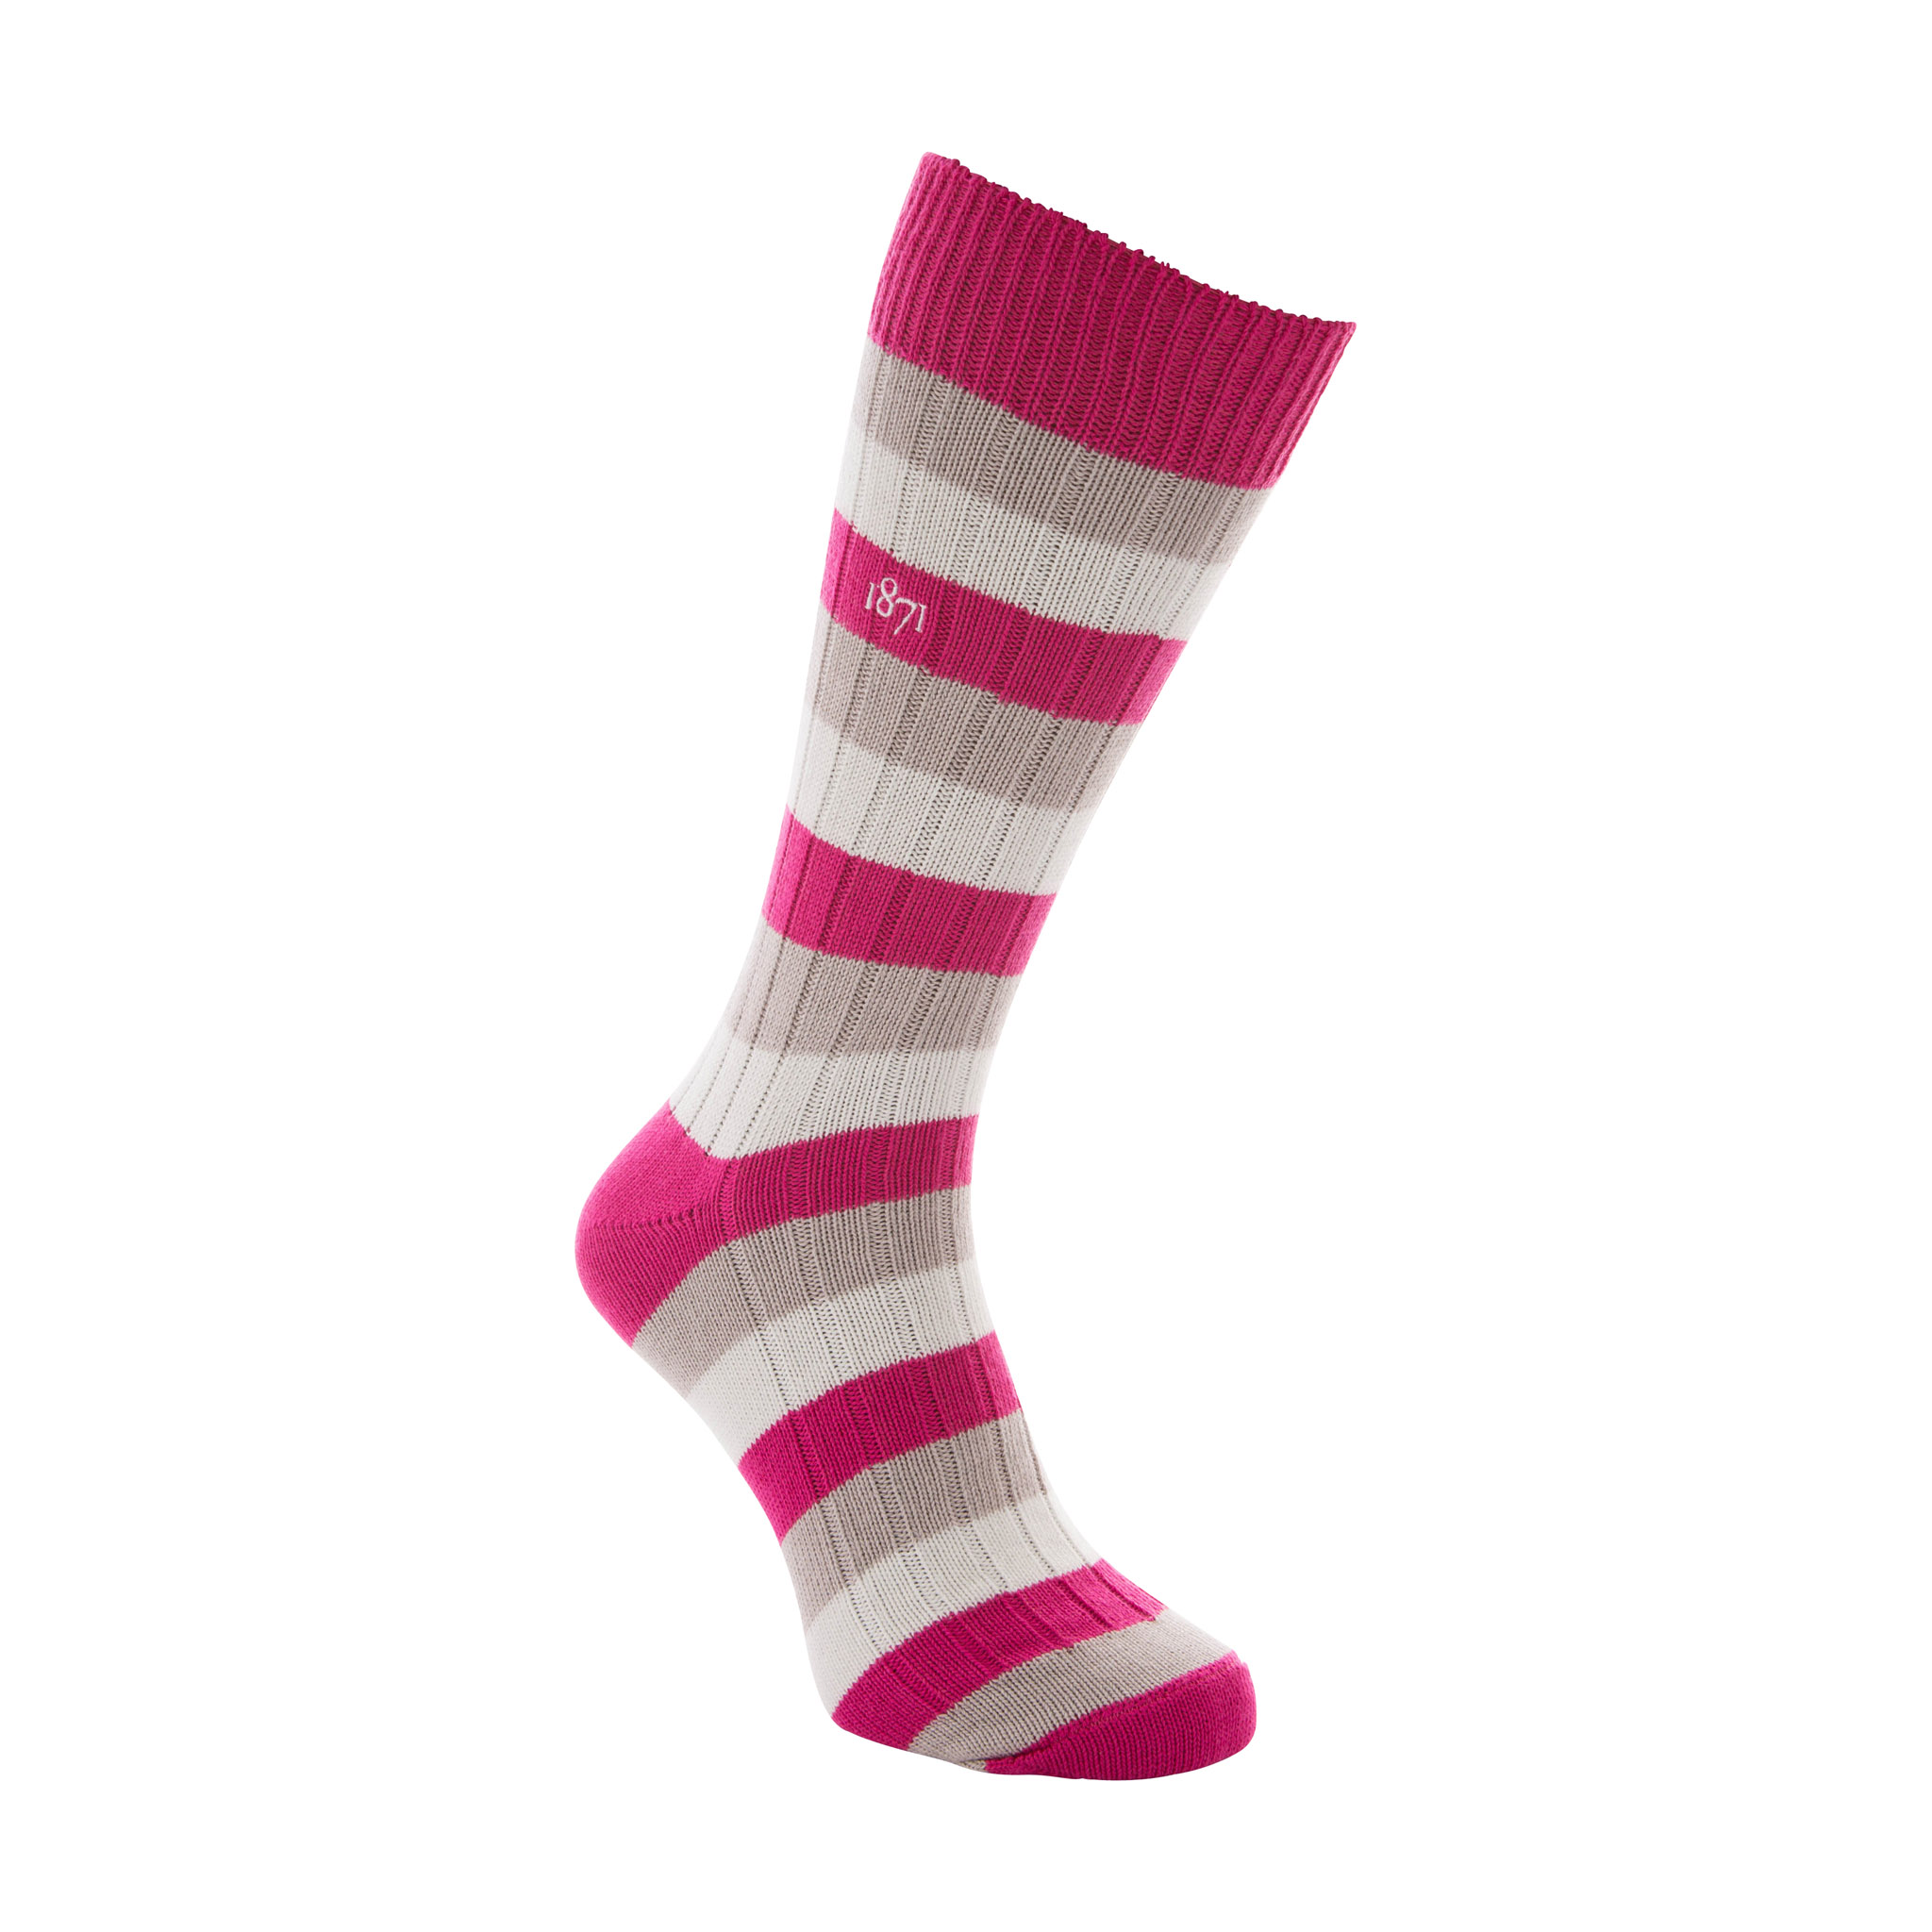 Cotton raspberry, grey and white stripe sock - side view